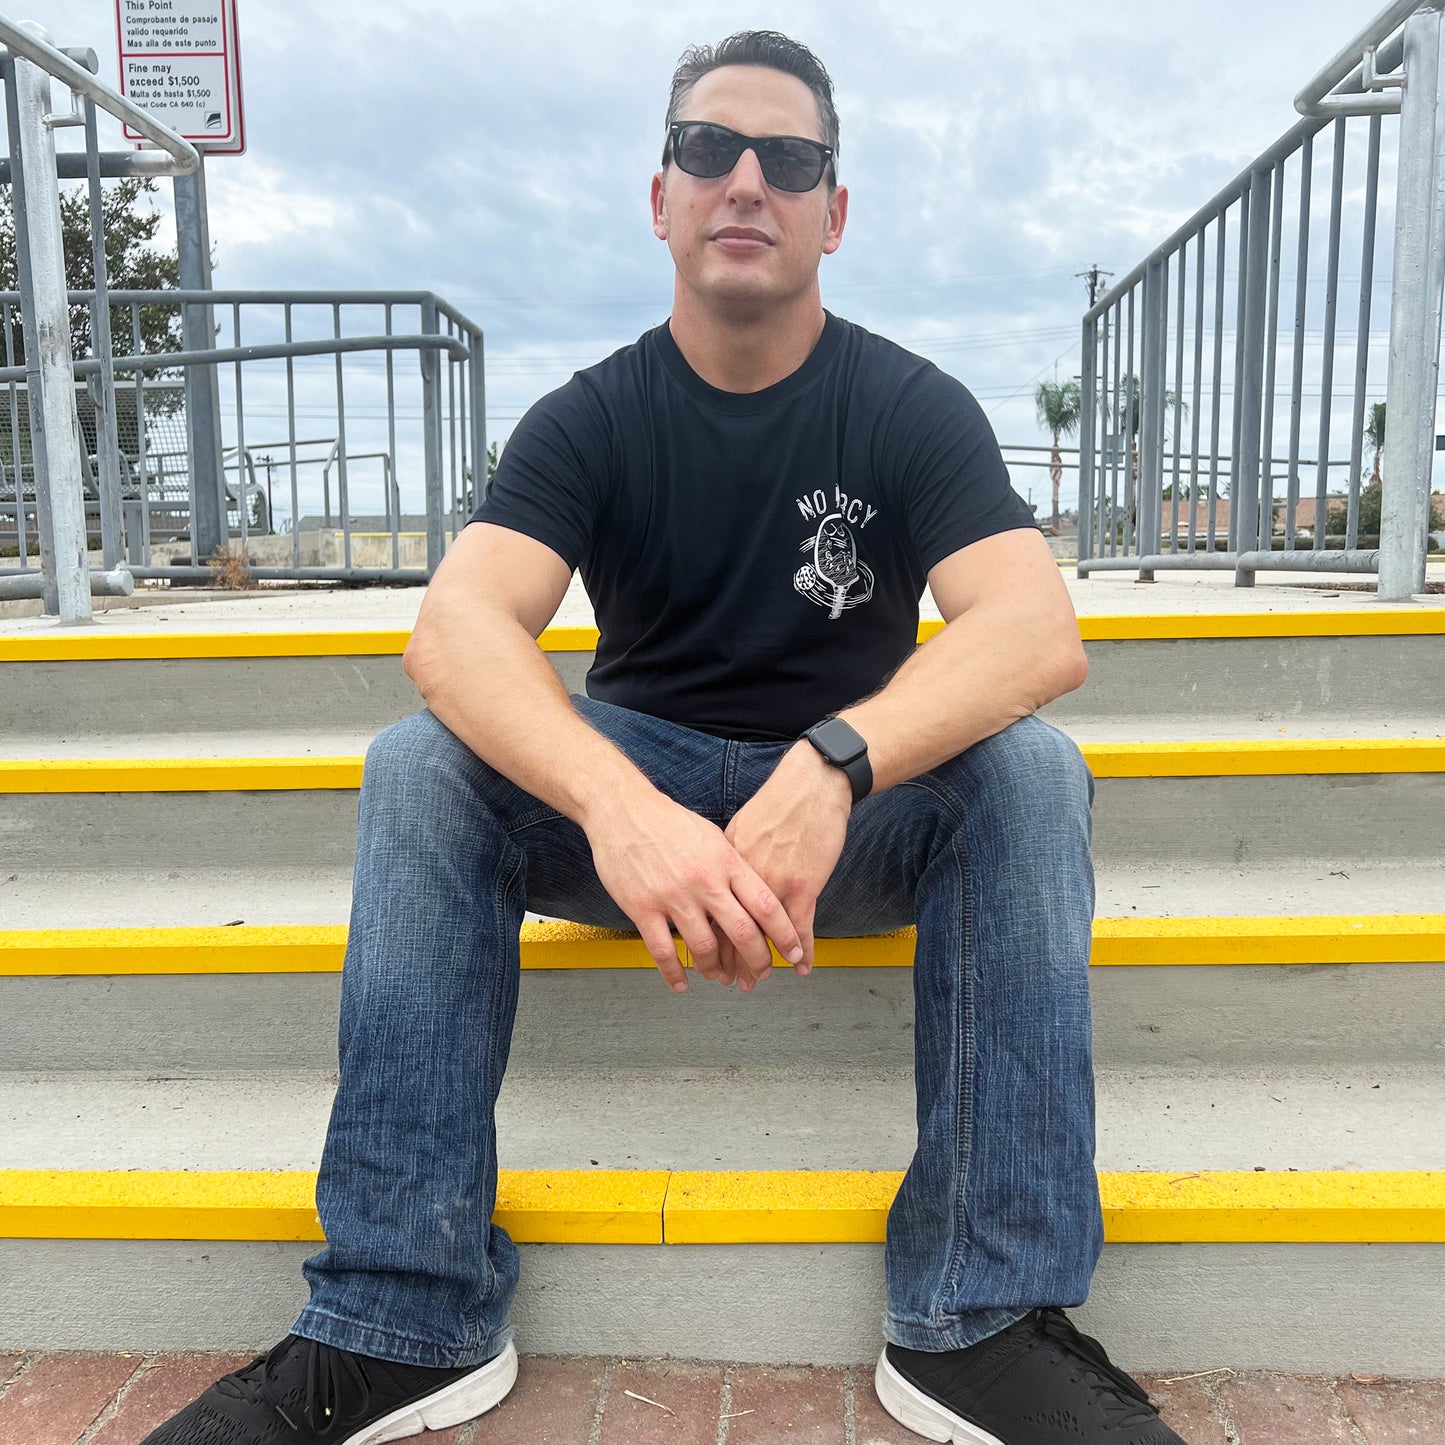 No Mercy Pickleball T-Shirt - Sitting on the steps at the train station